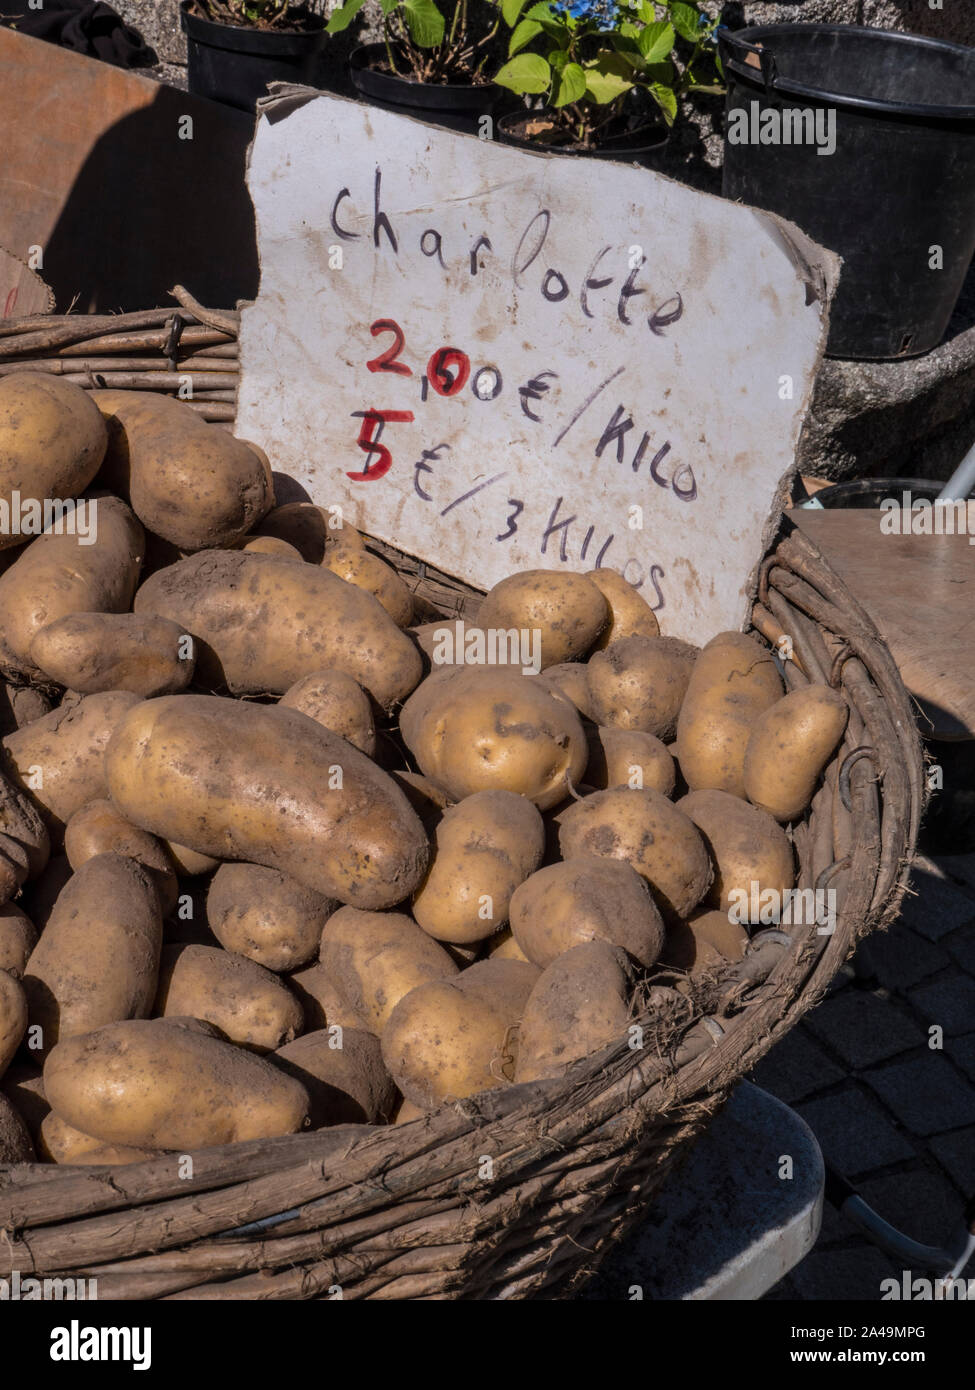 CHARLOTTE POTATOES FRENCH 2€ kilo Pannier basket of French potatoes on display in Fresh Farmers Market Nevéz Brittany France Stock Photo